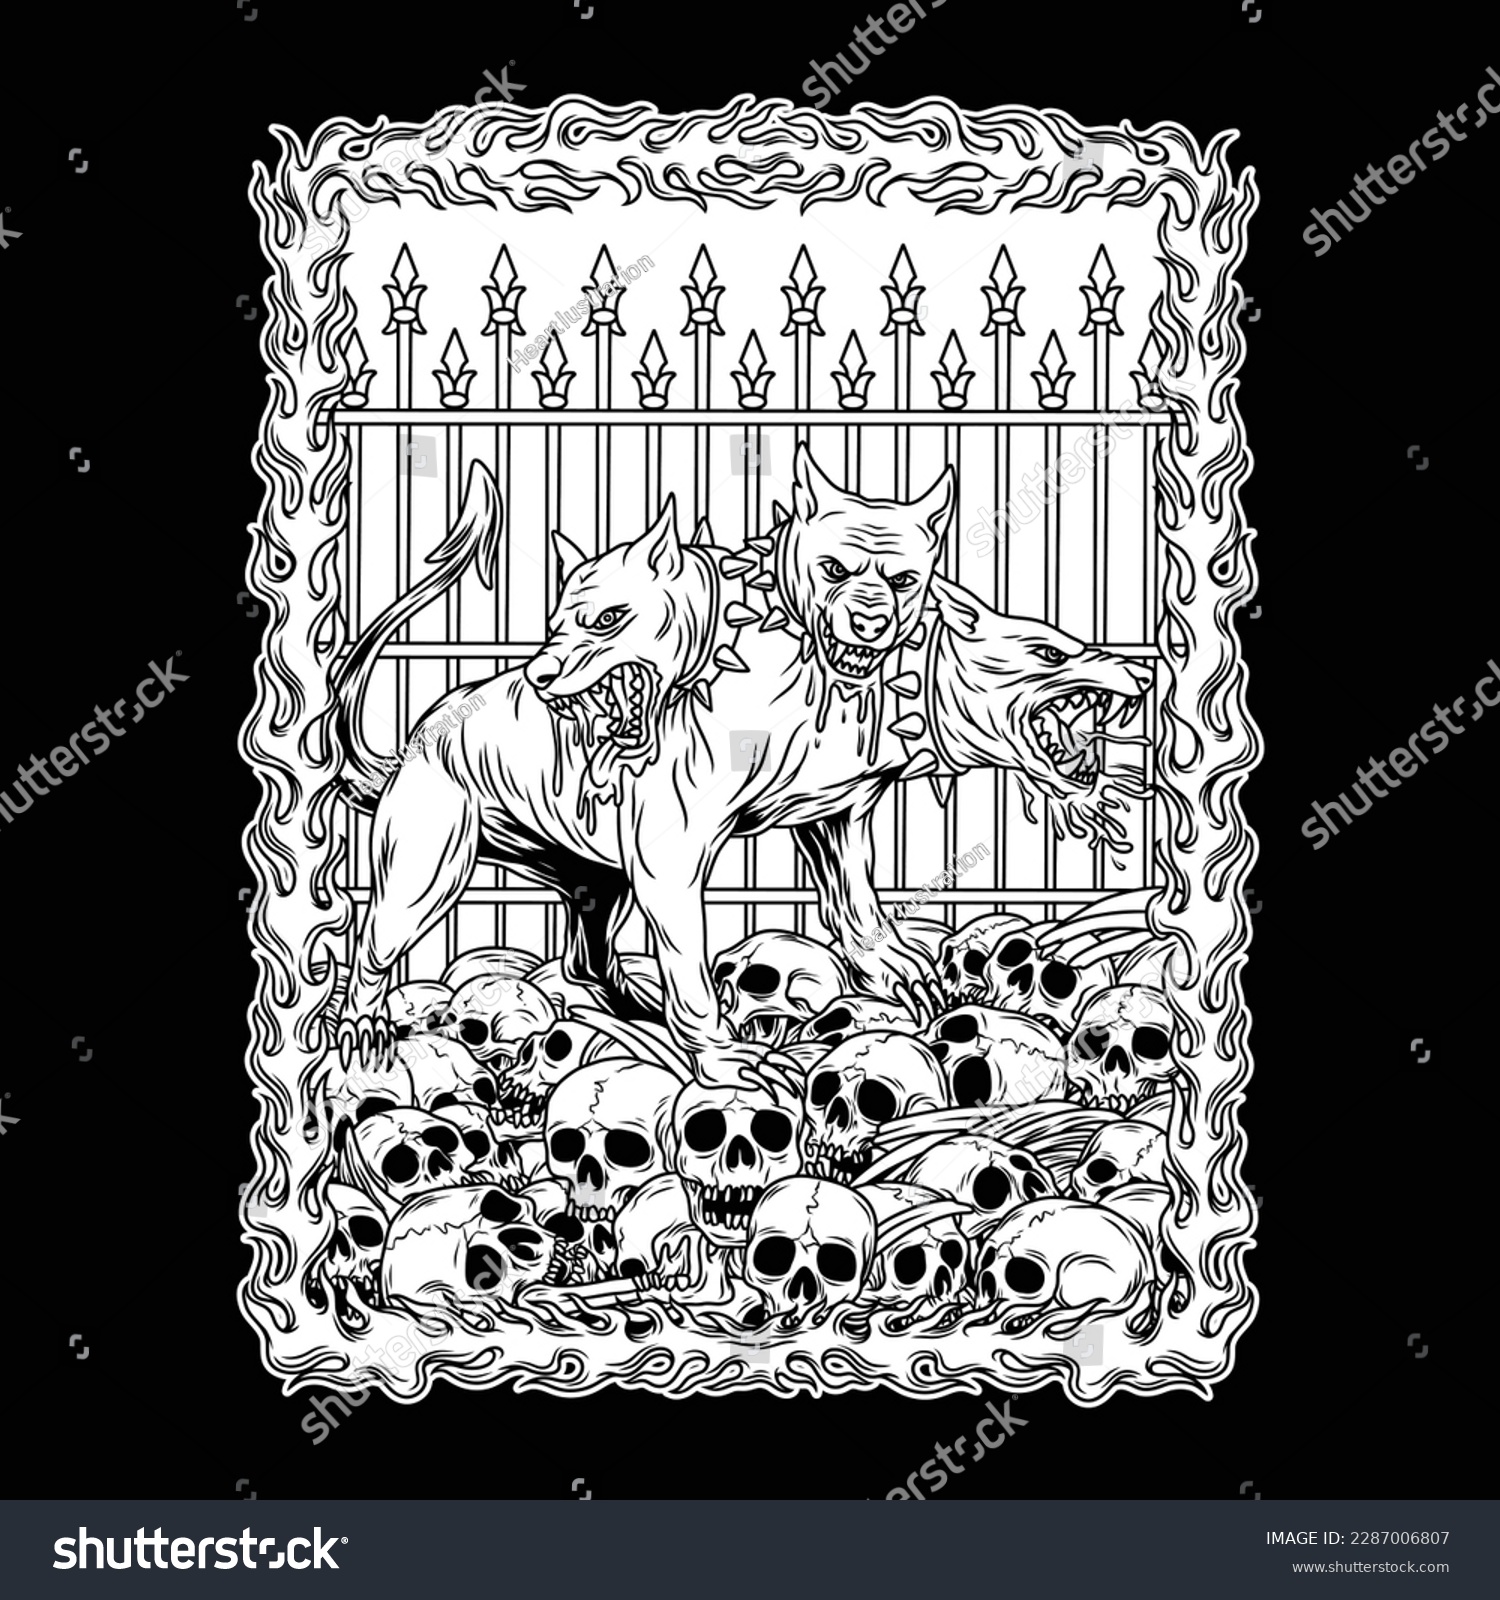 SVG of The black and white image shows a scary three-headed dog standing in a pile of skulls. Kerberos is a creature from Greek mythology, the pet of Hades. Kerberos is depicted as a dog with three heads.
 svg